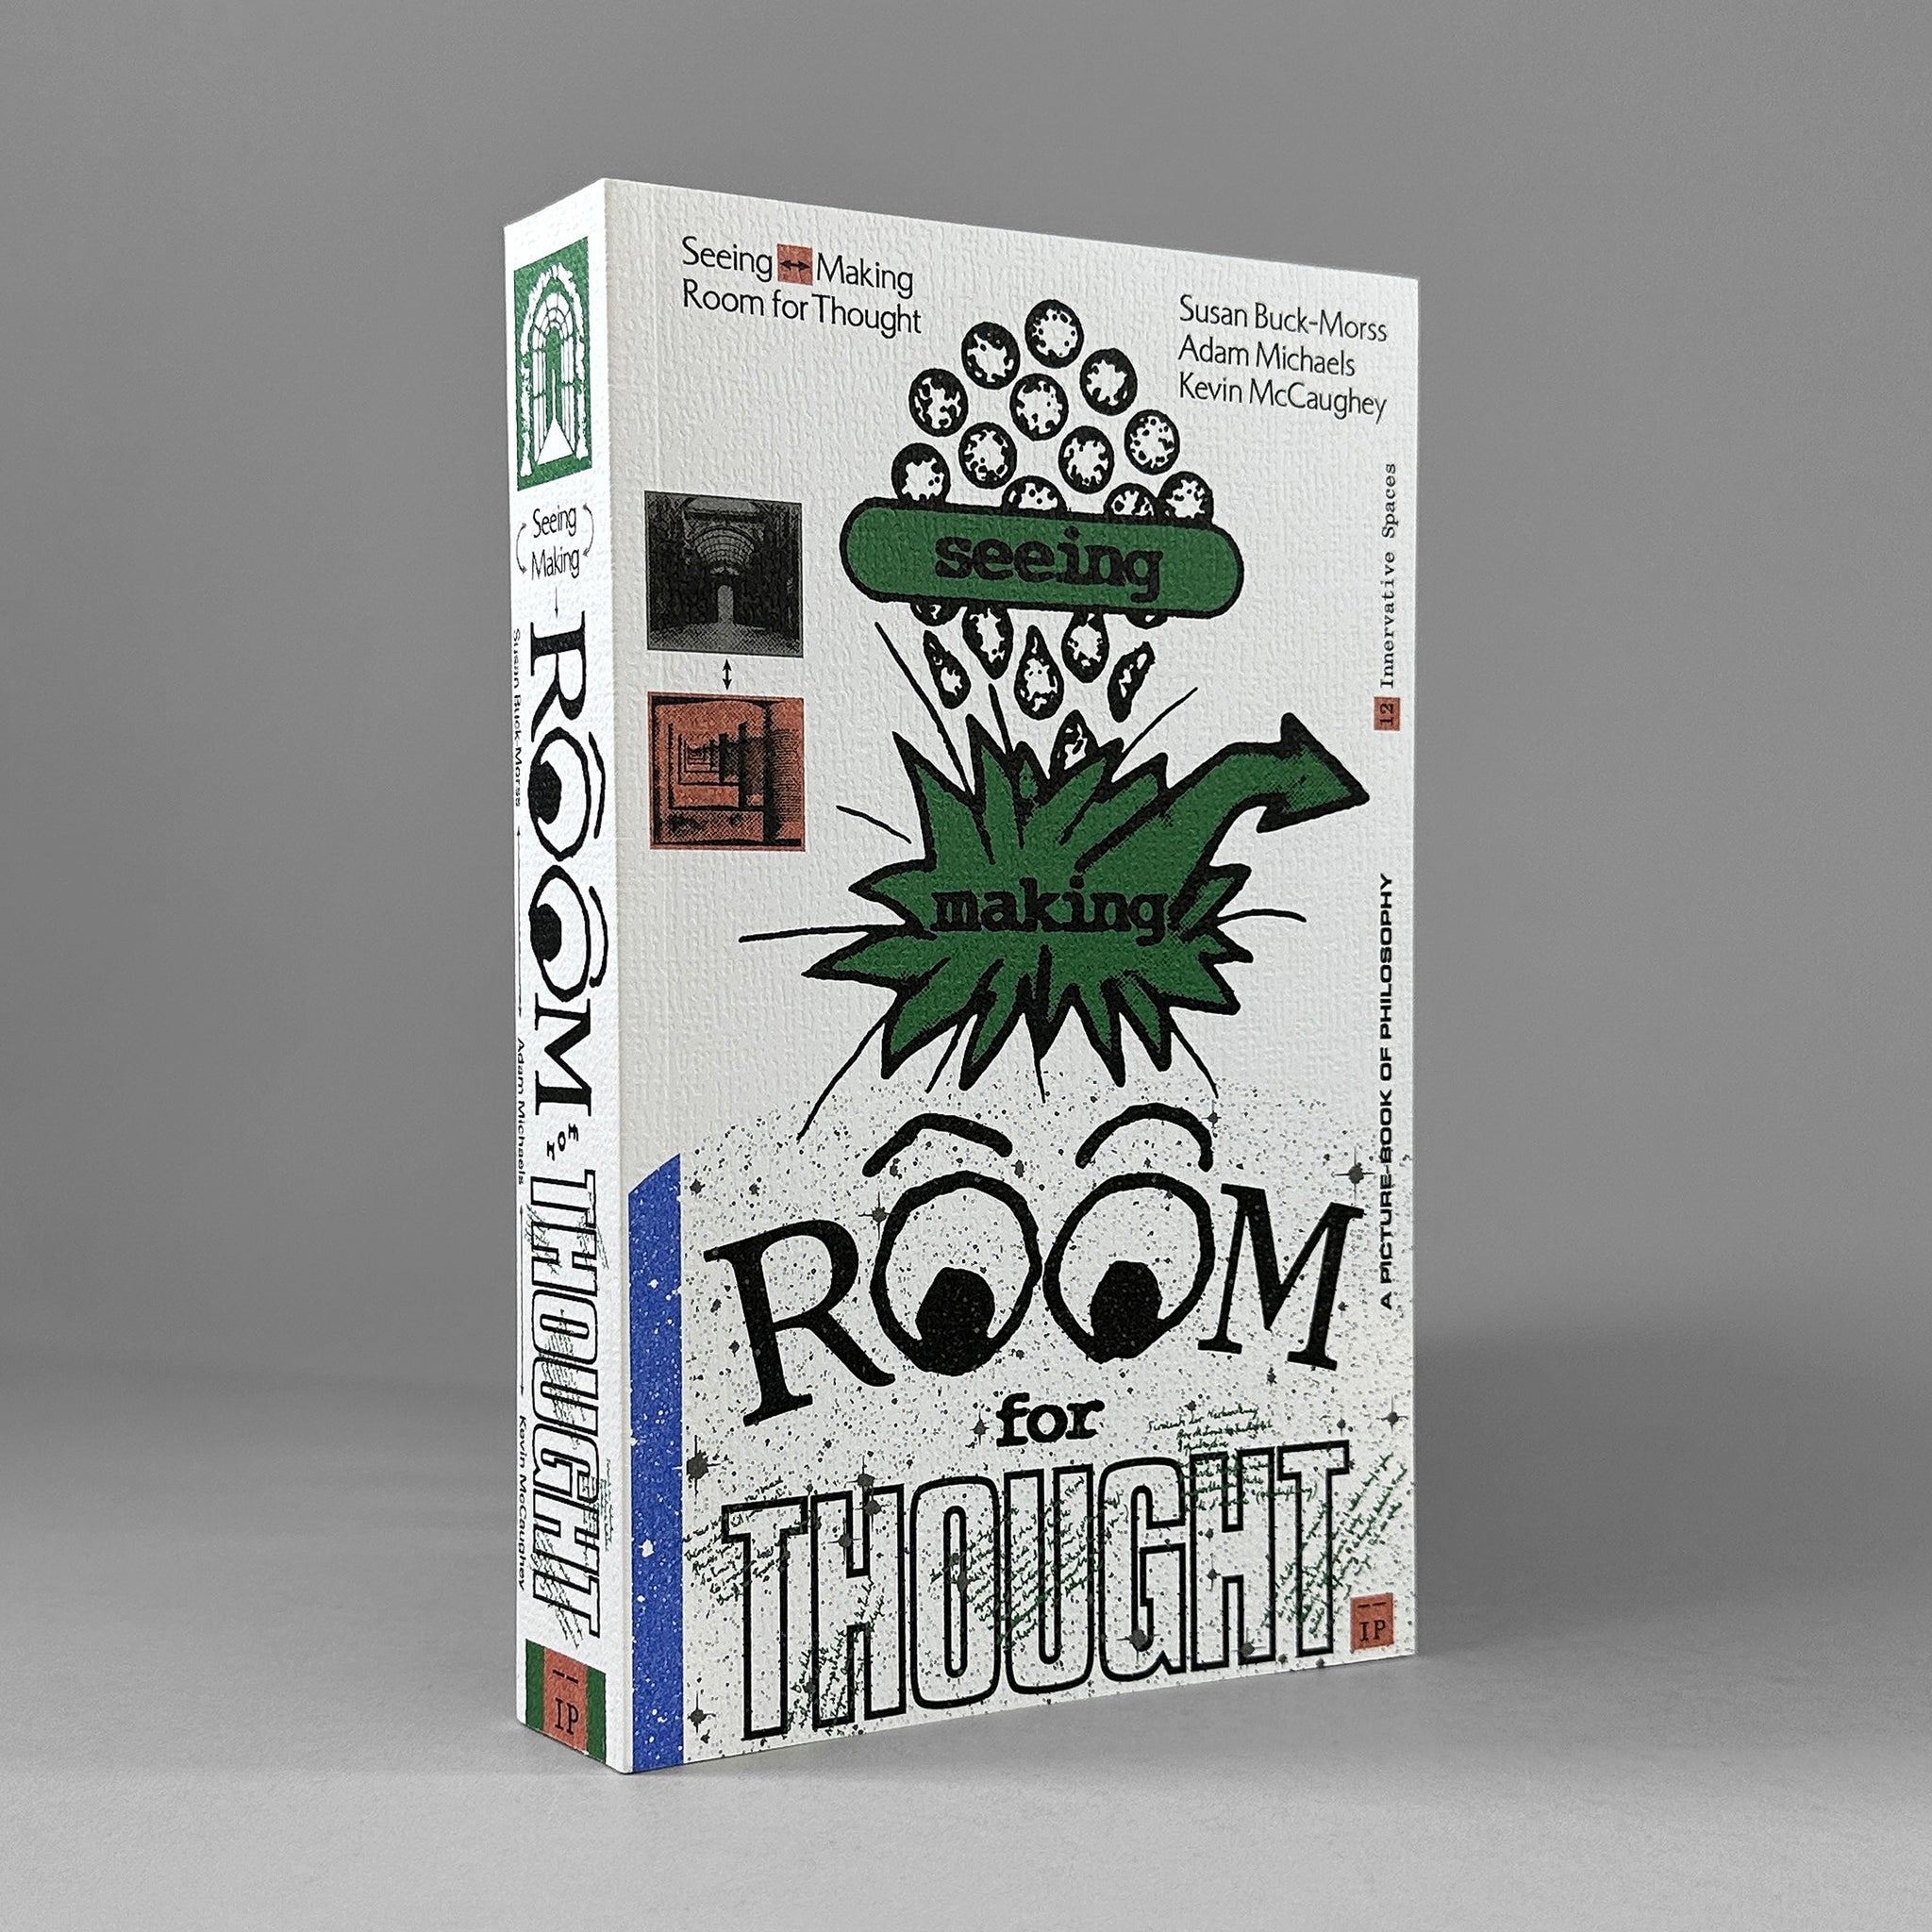 Seeing <—> Making: Room for Thought